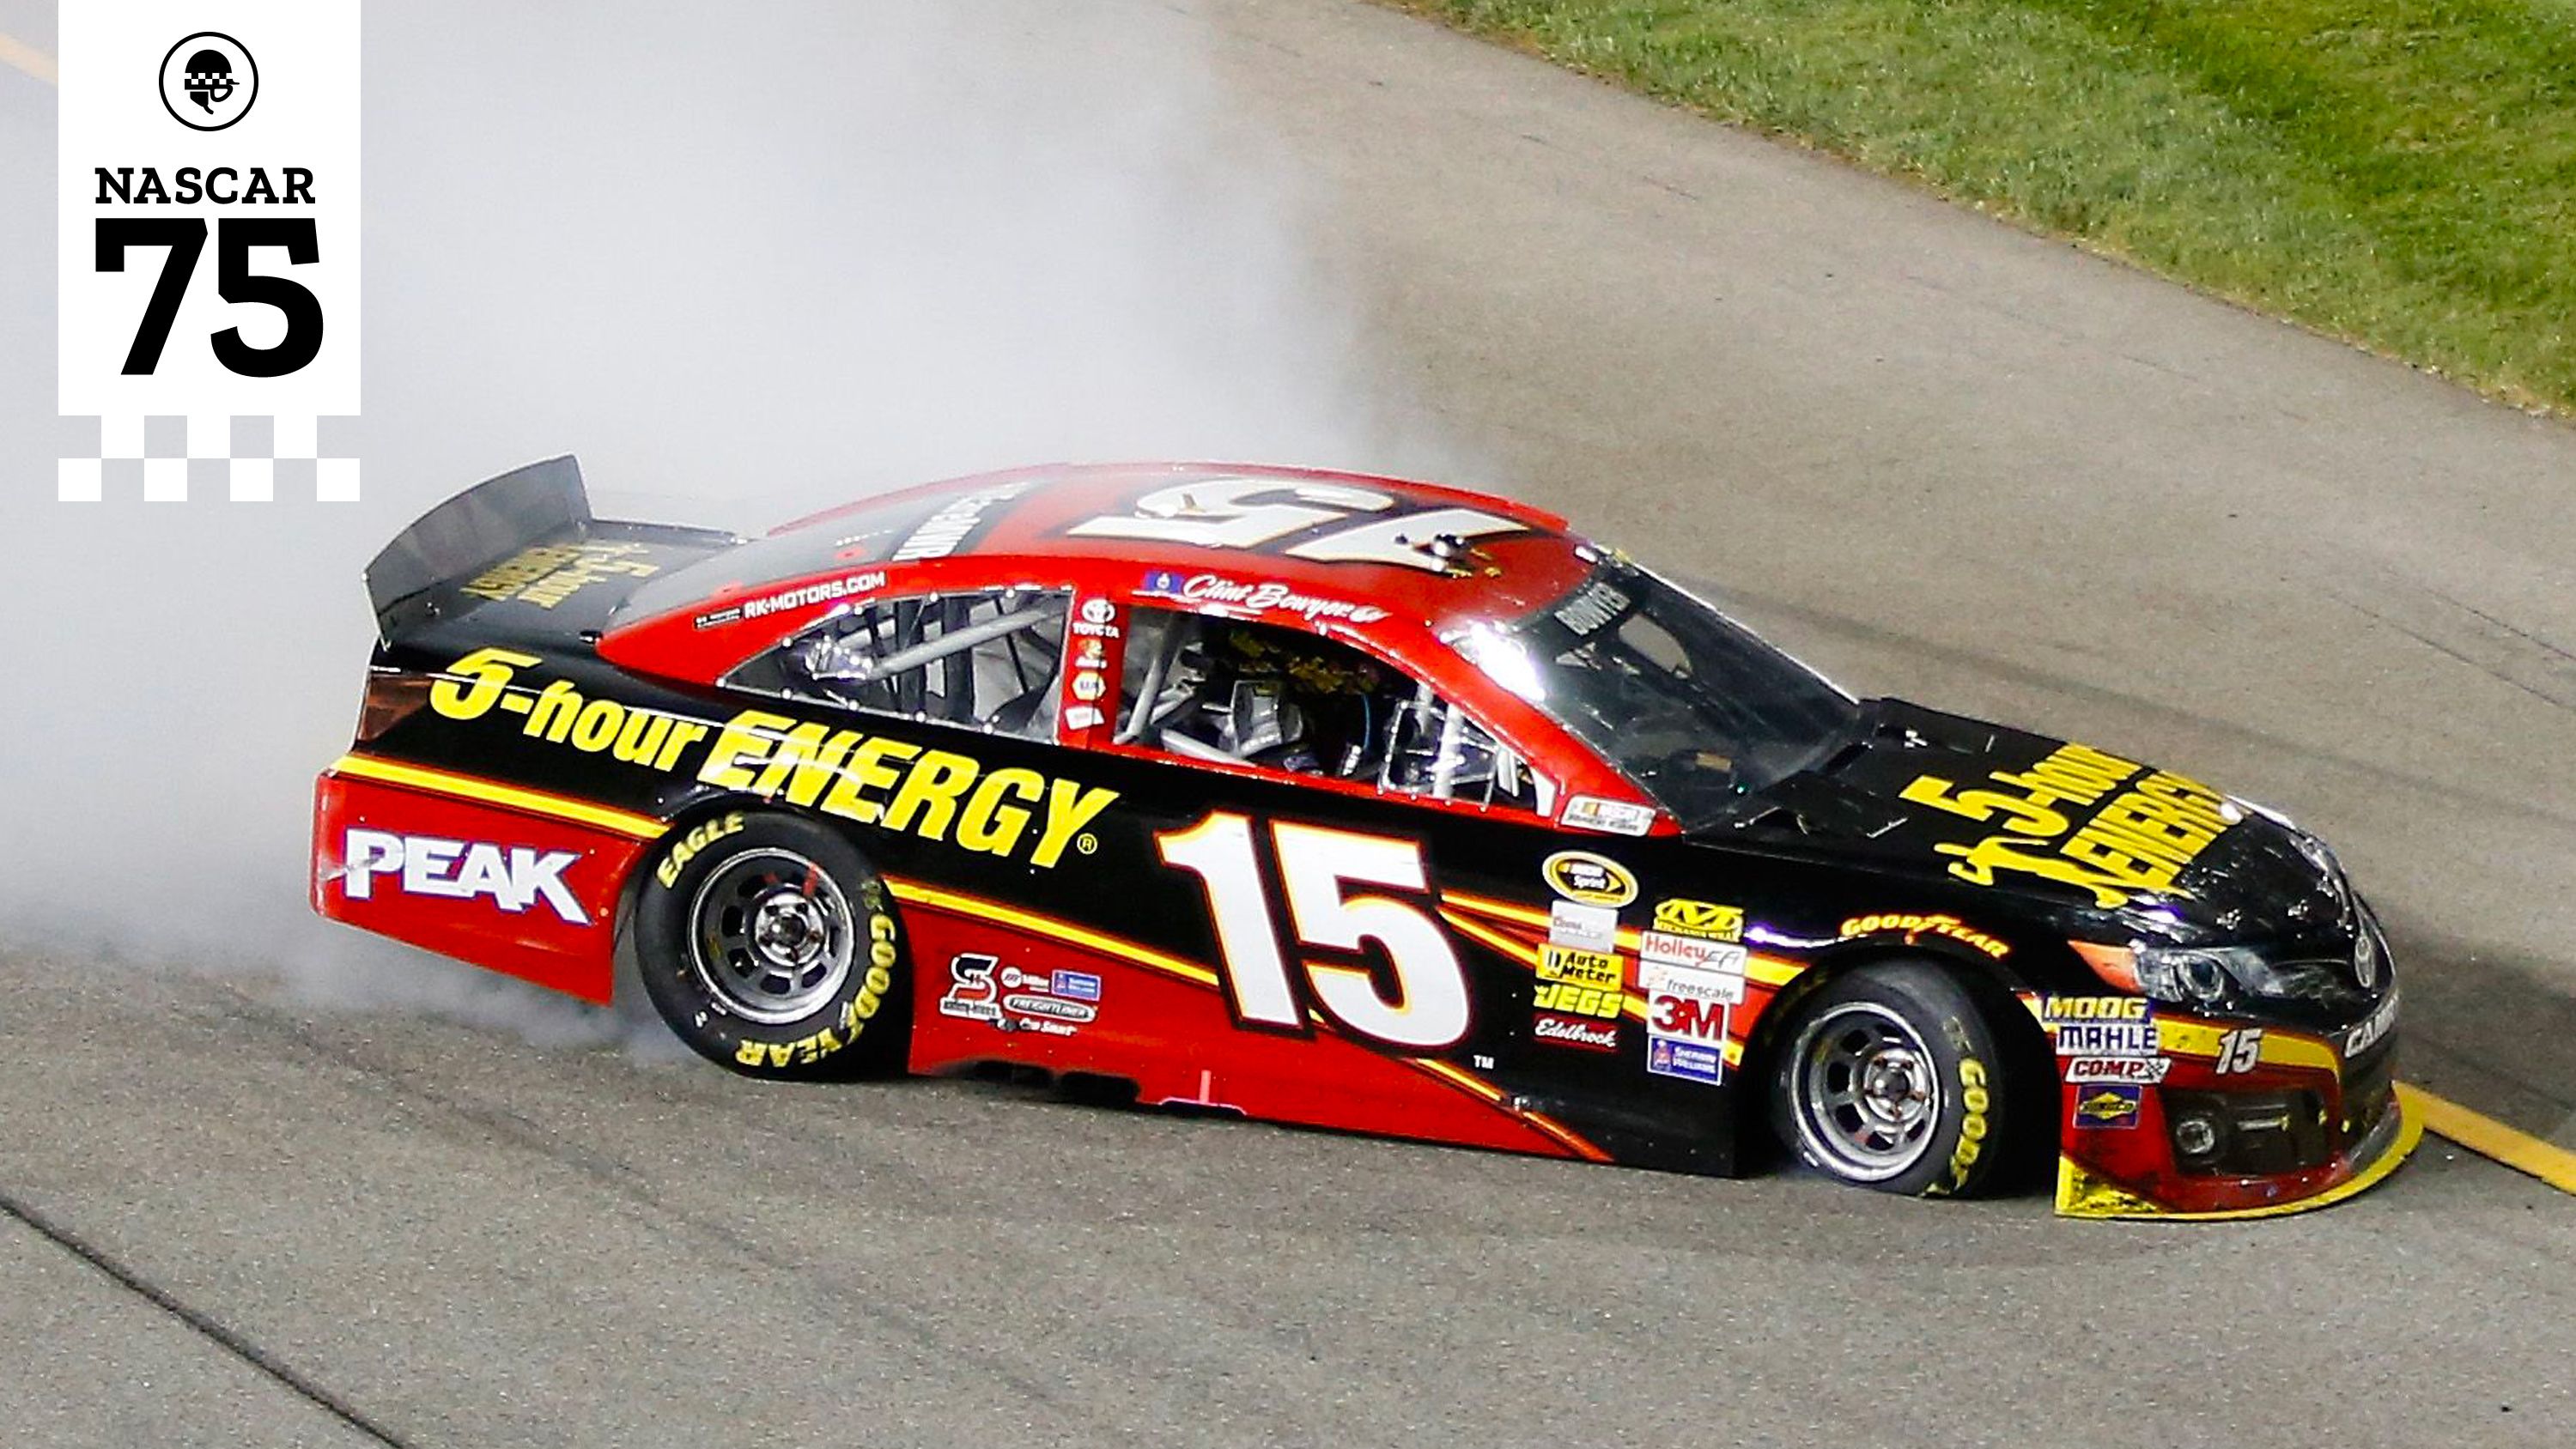 How a Spinout Destroyed the Michael Waltrip Racing NASCAR Team in 2013